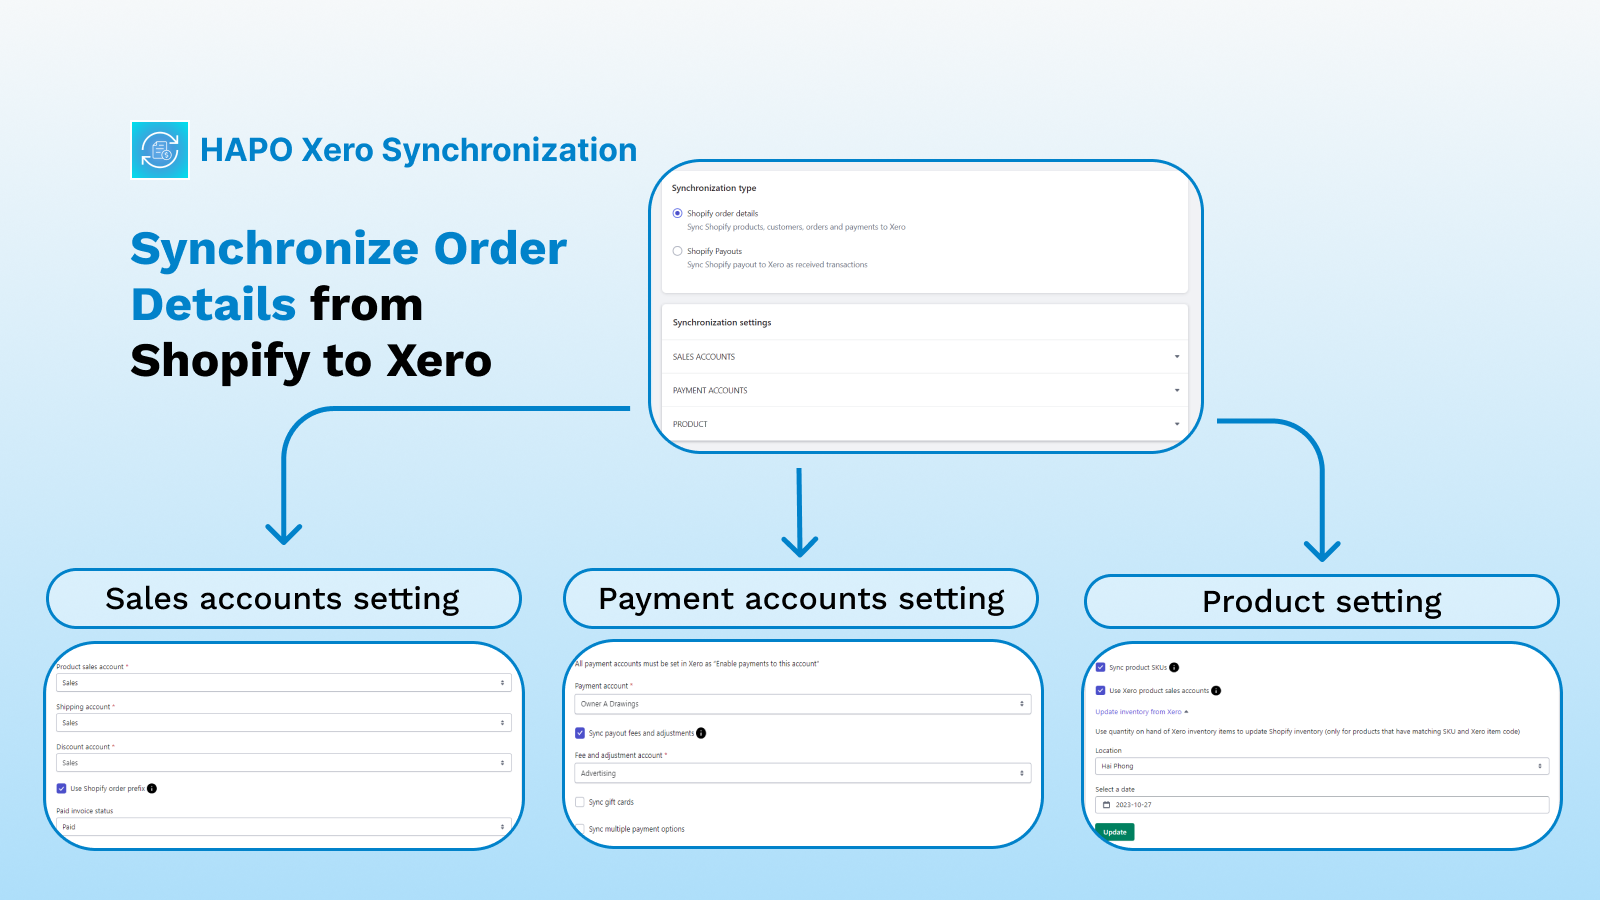 Synchronize Order details from Shopify online store to Xero.